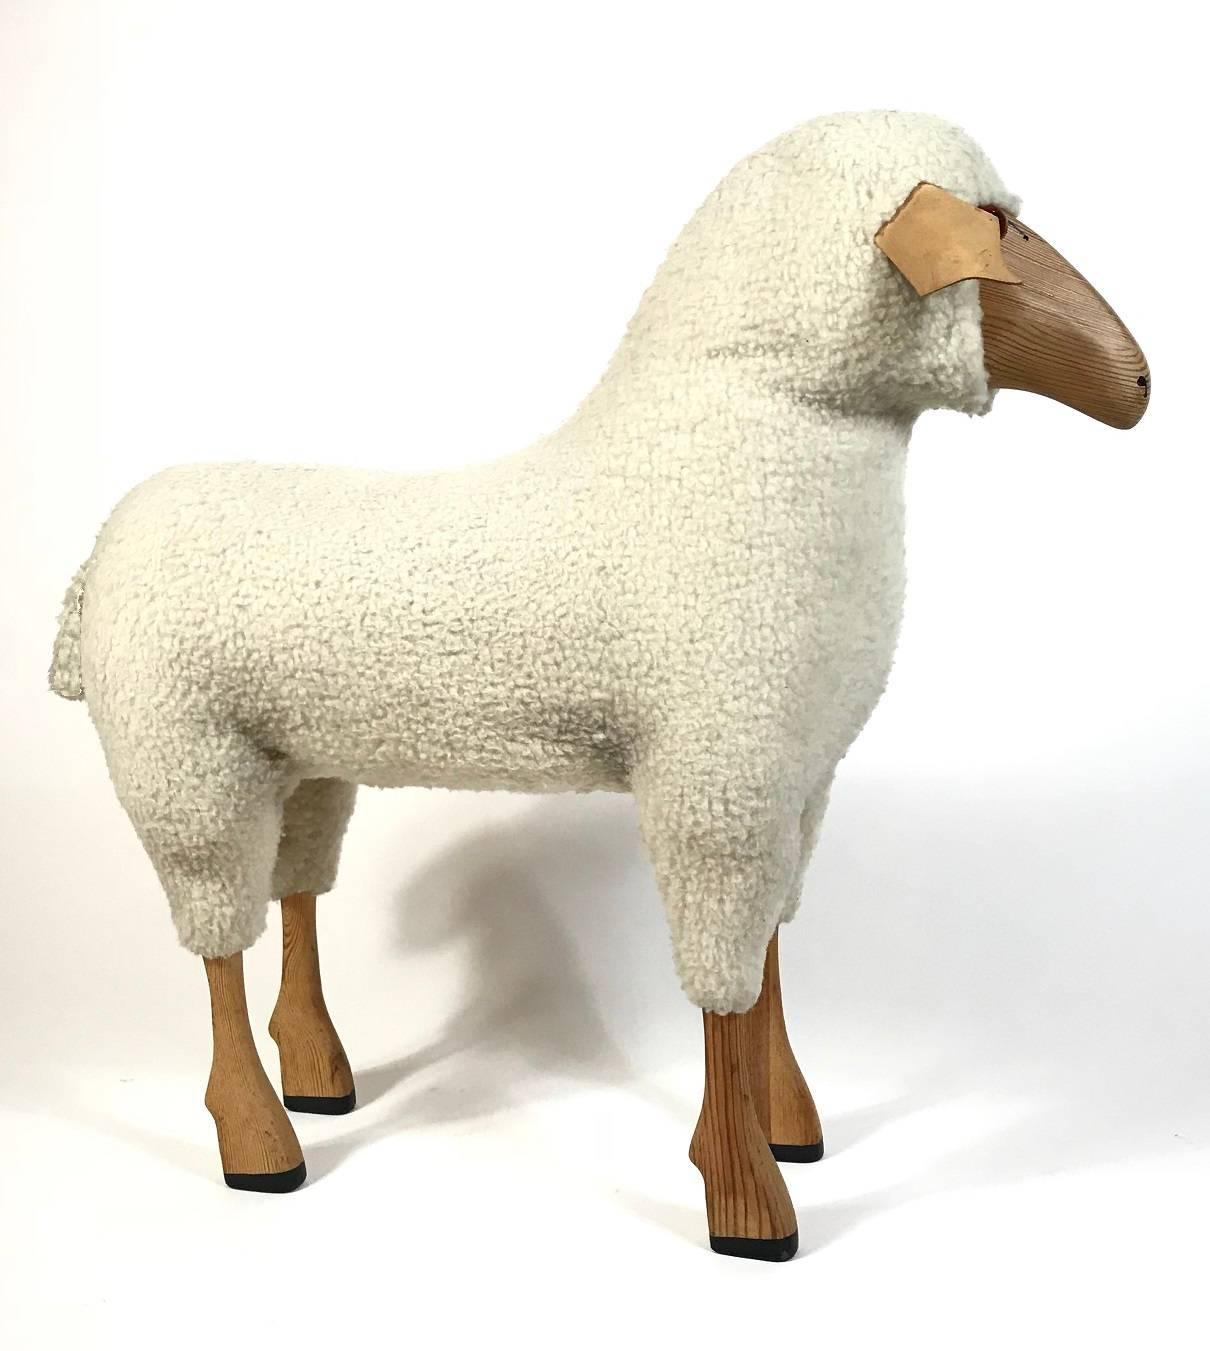 Very decorative handmade lambswool sheep stool object from early 1970s. The handmade wooden body is covered with beige/white lambswool fur. We have four sheep in stock, two big and two small ones - if you are looking for the smaller one, please